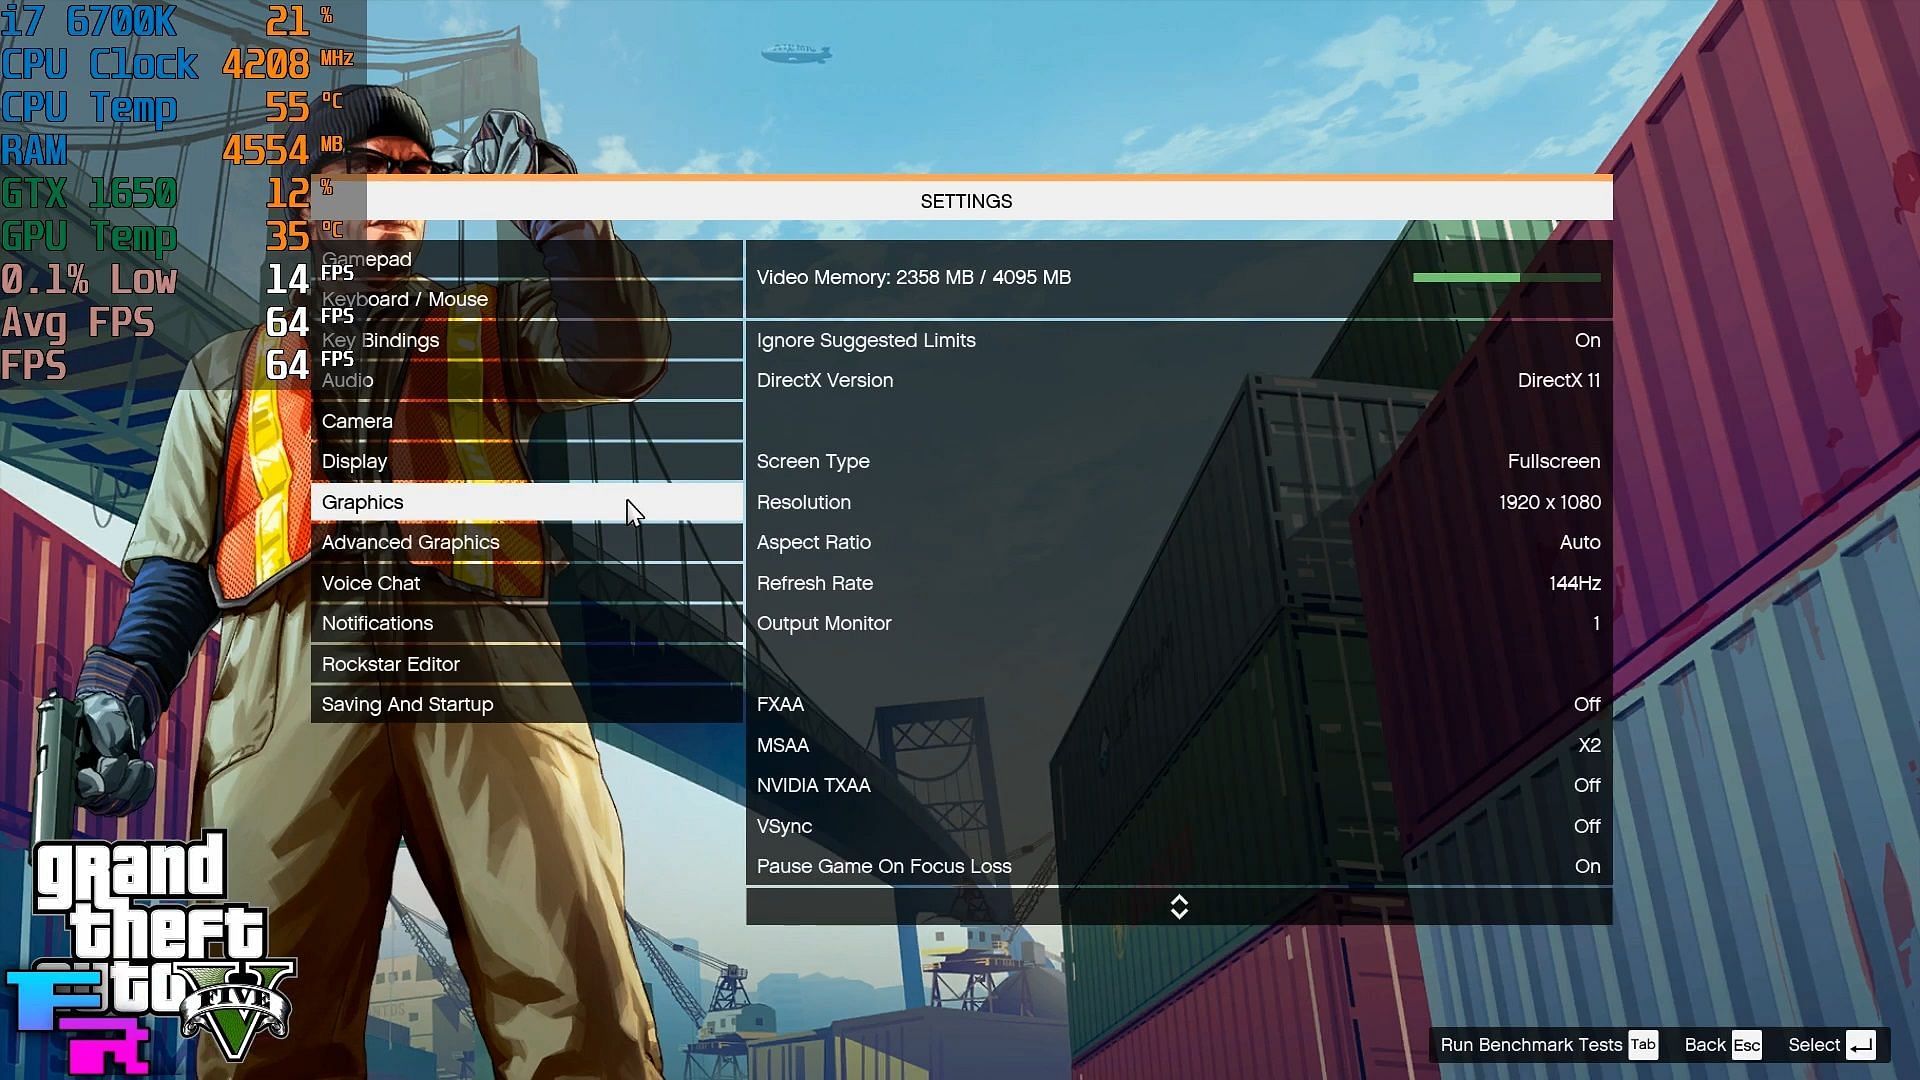 Graphics settings page 1 (Image via FrameRated, YouTube)